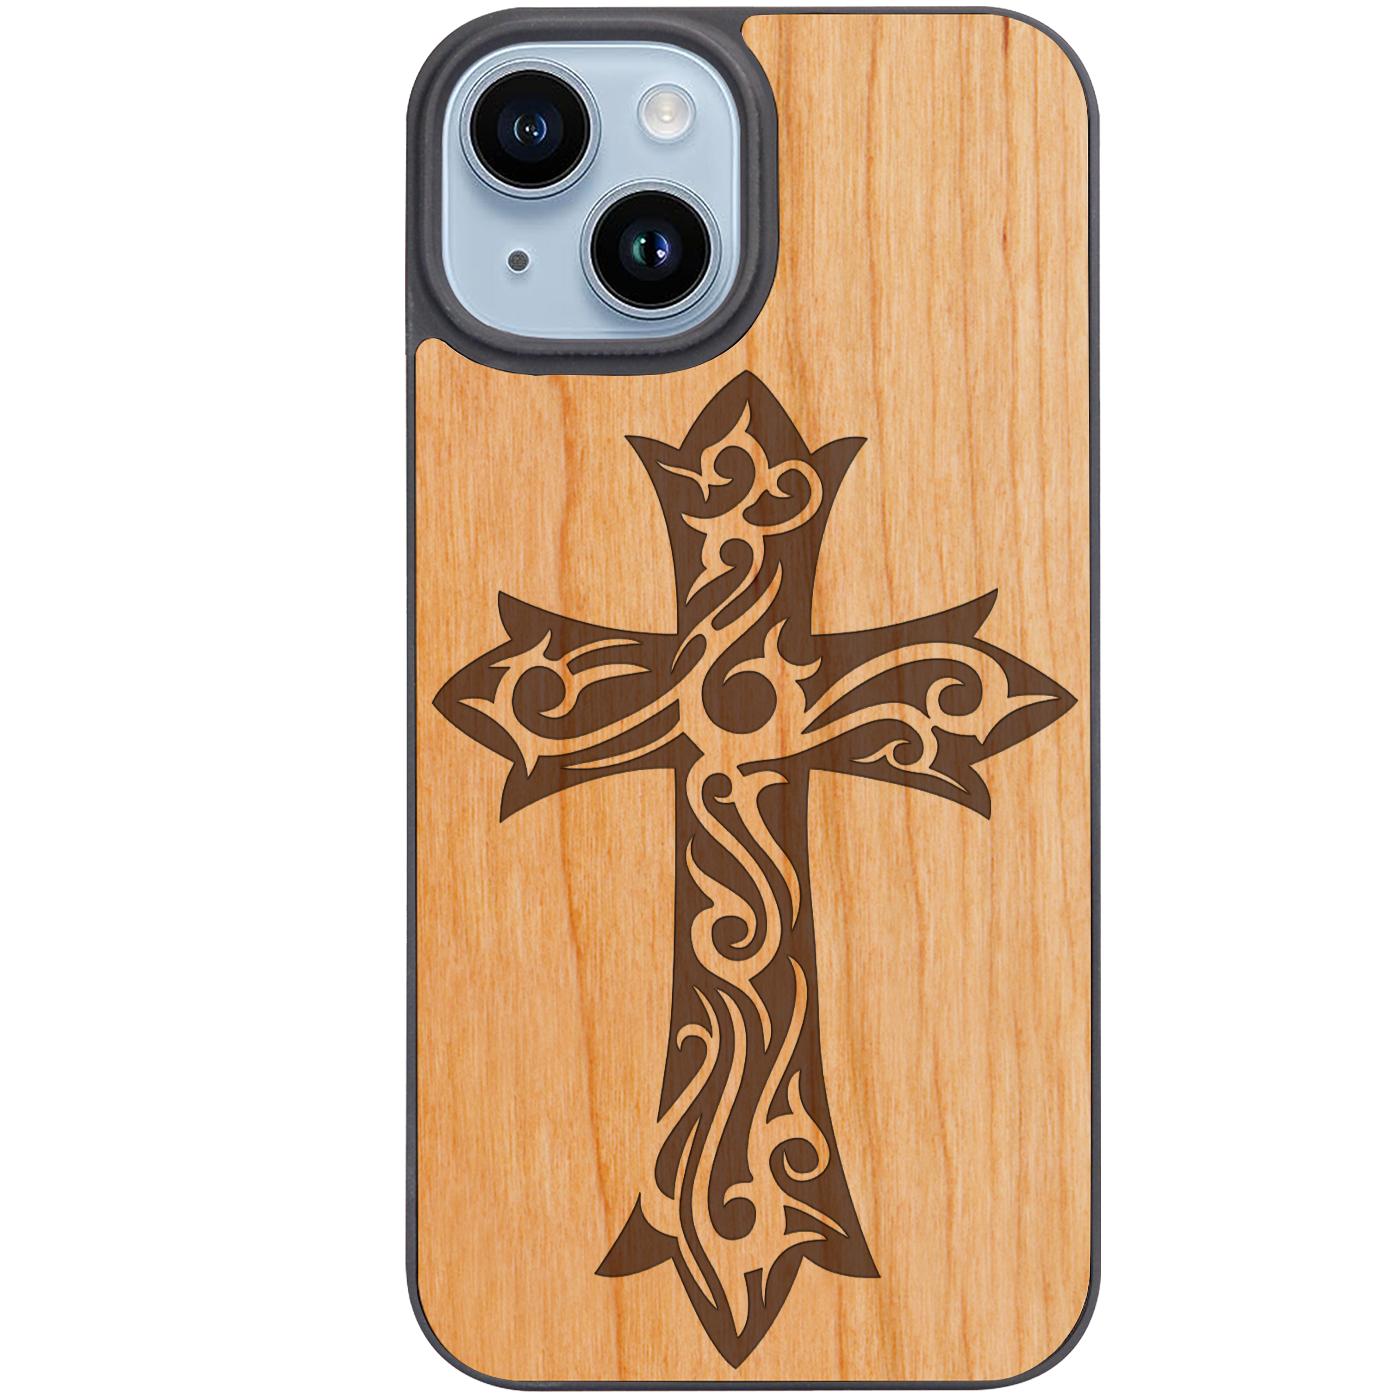 Floral Cross - Engraved  Phone Case